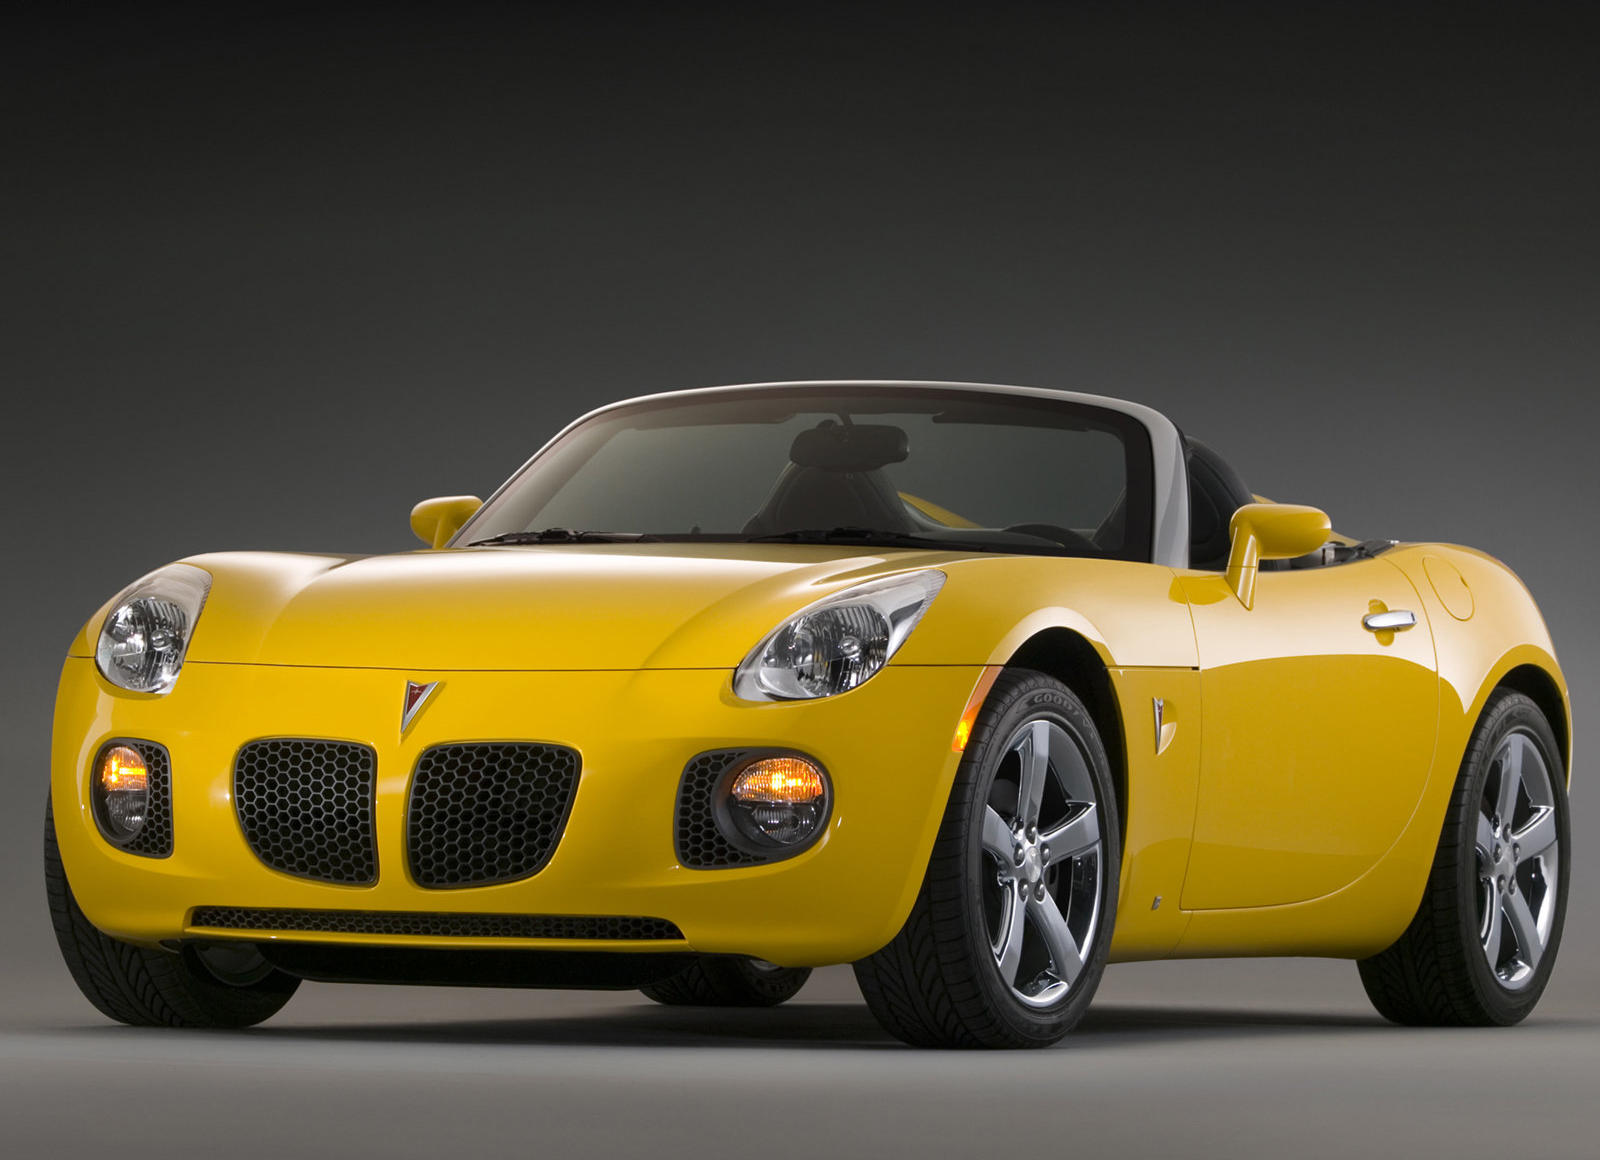 2009 Pontiac Solstice Convertible Front Angle View